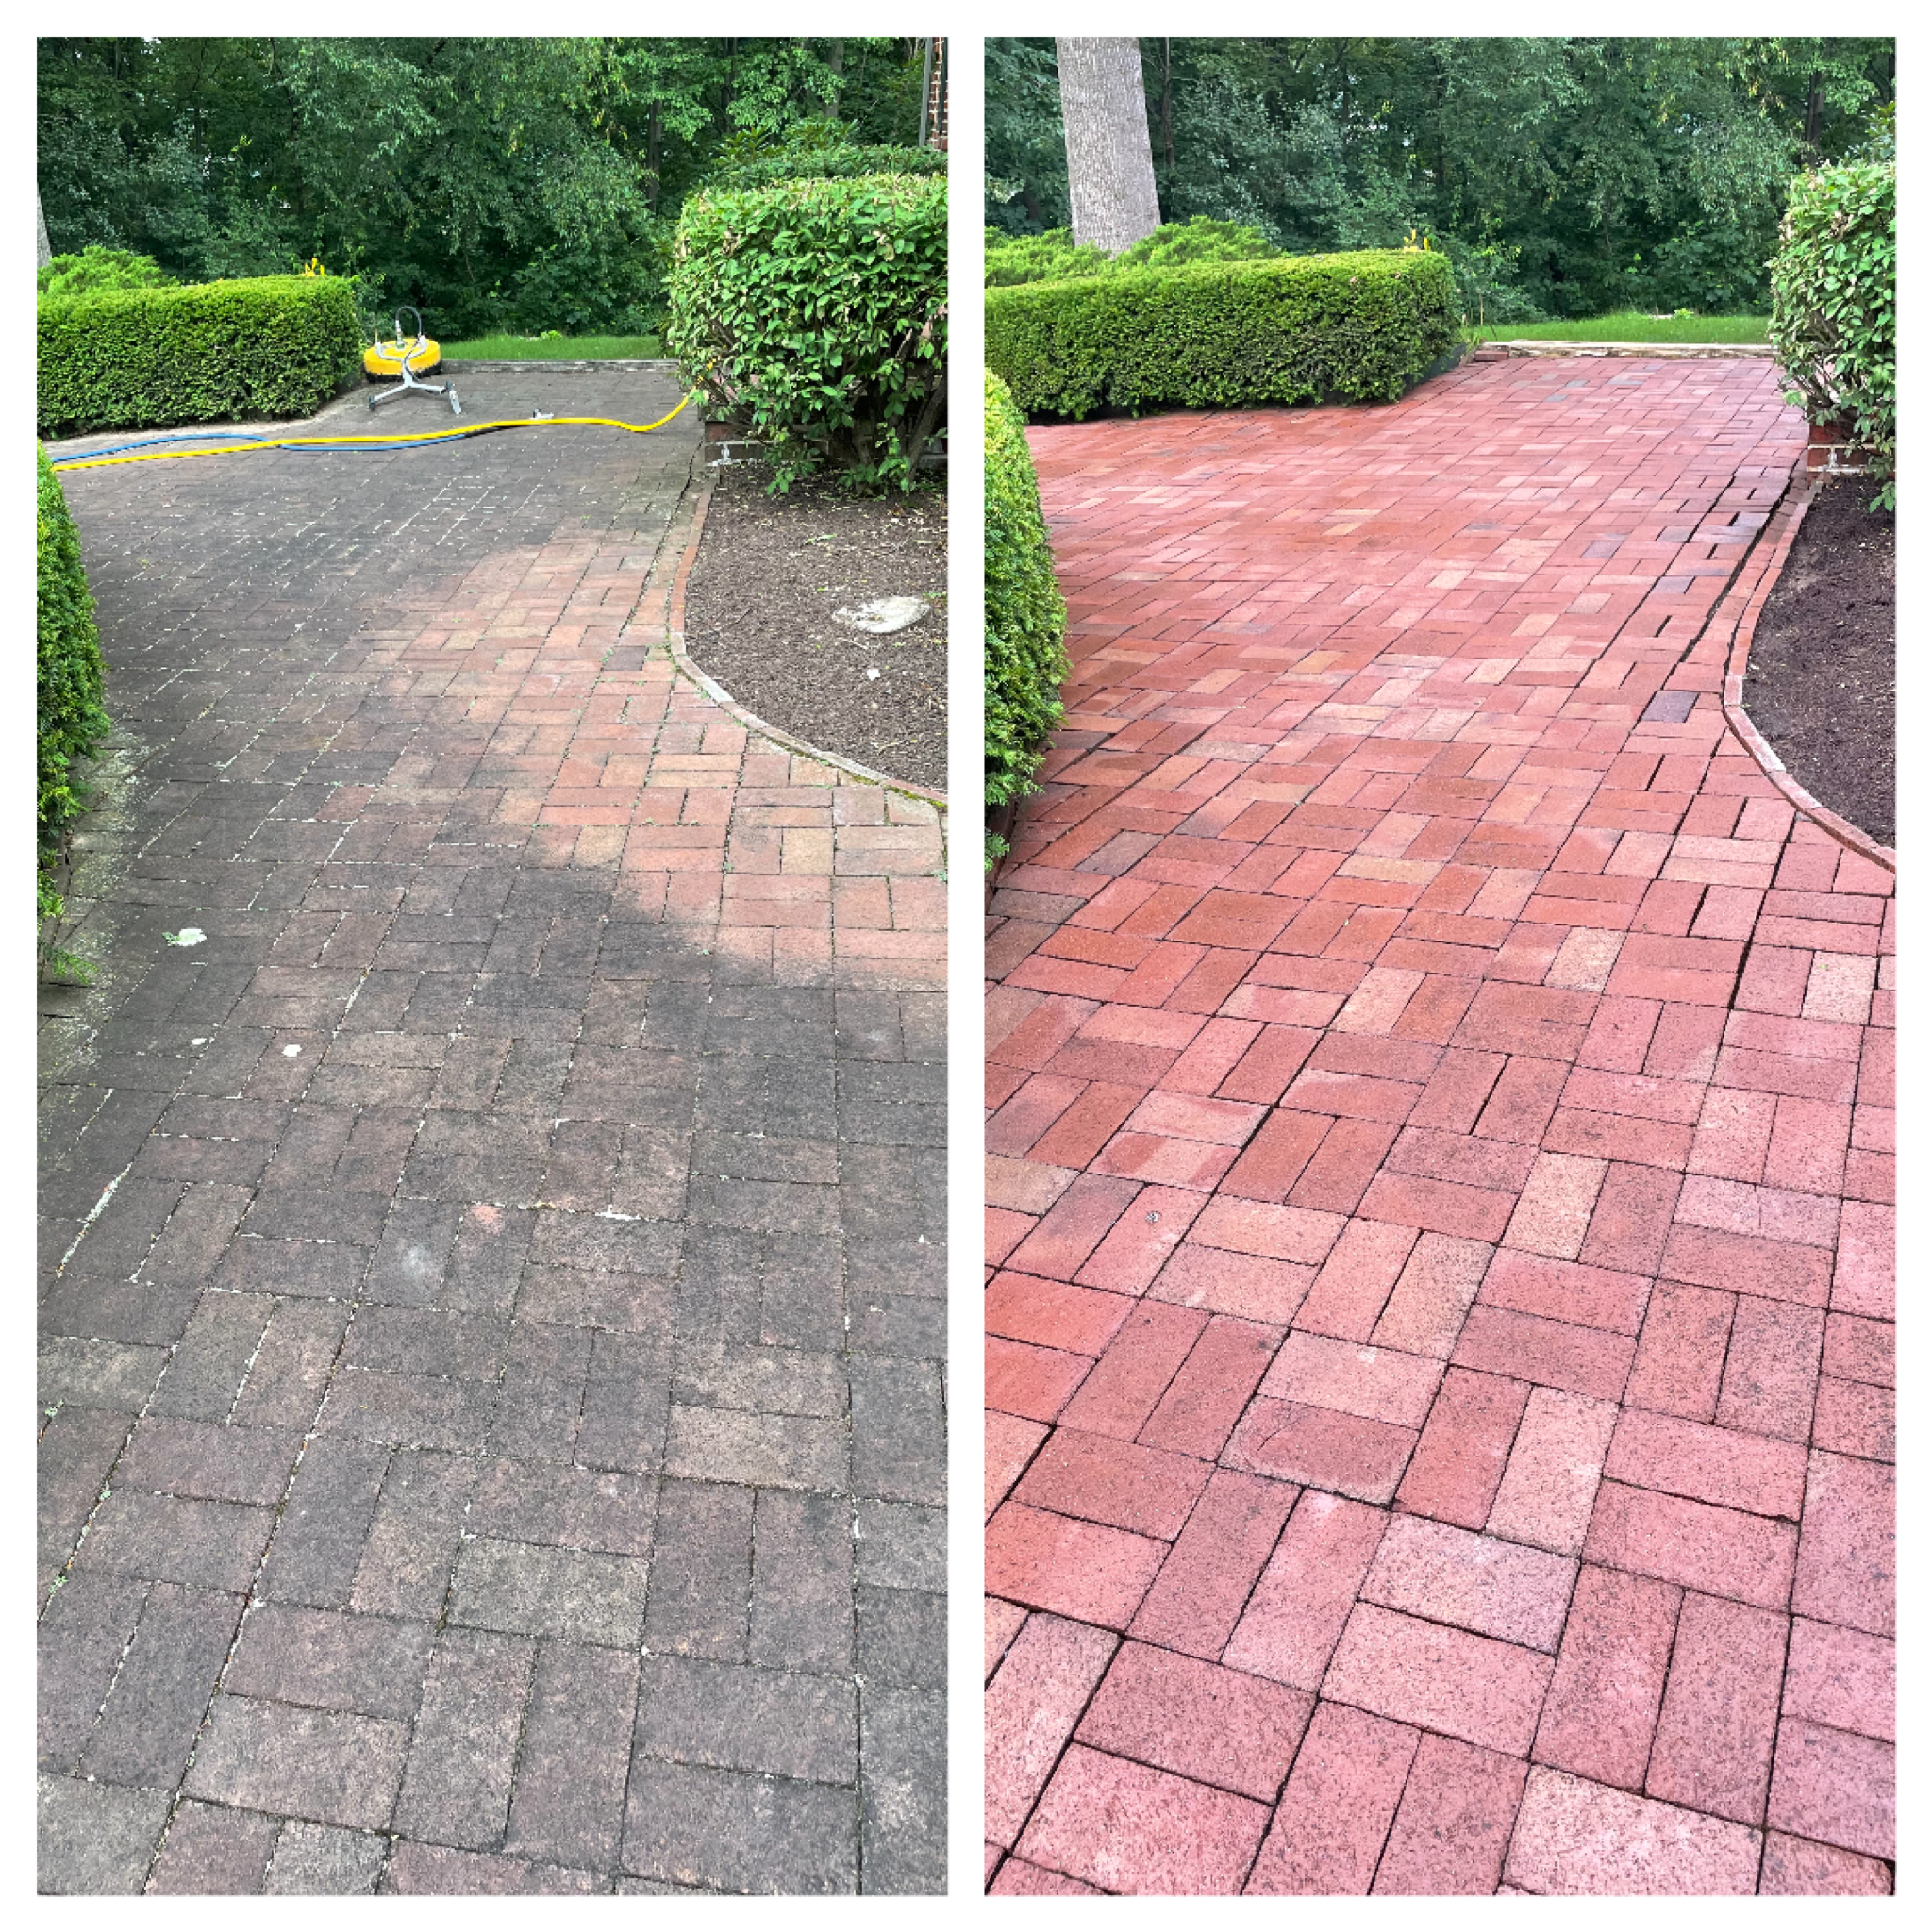 Outdoor Power Washing services in Selinsgrove PA by NextGen Power Wash LLC